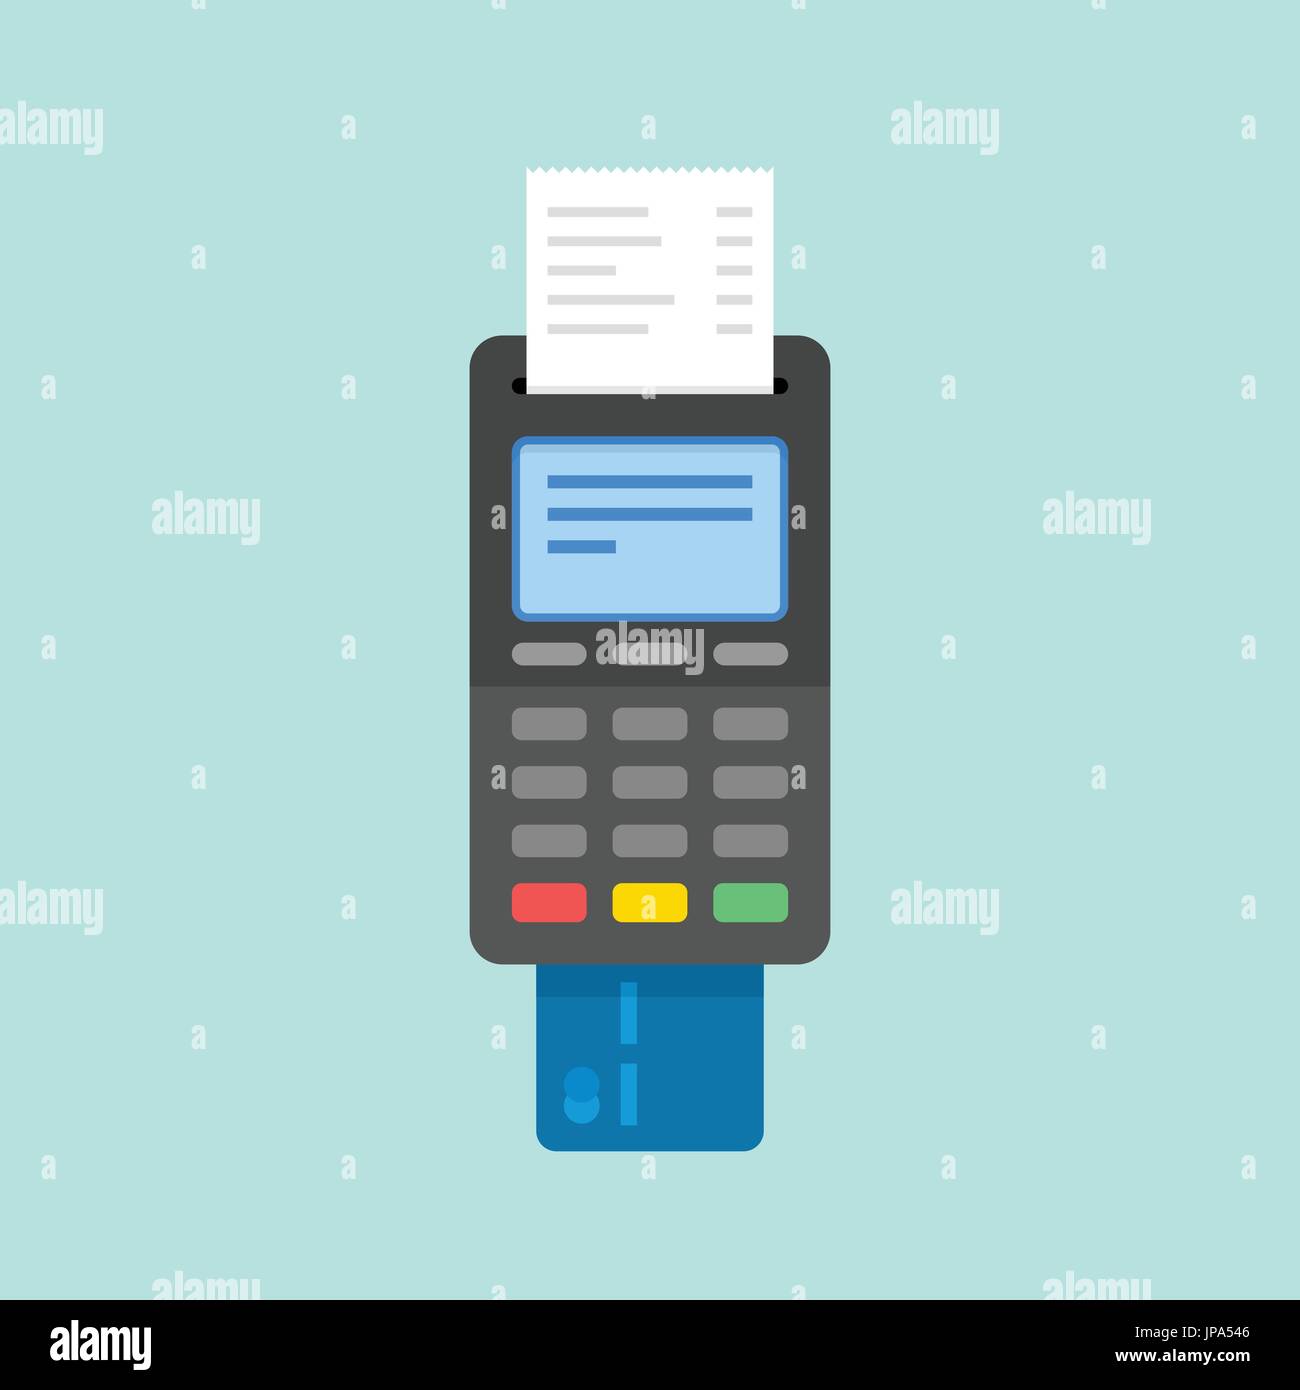 Payment by credit card using POS terminal. Flat illustration. Stock Vector